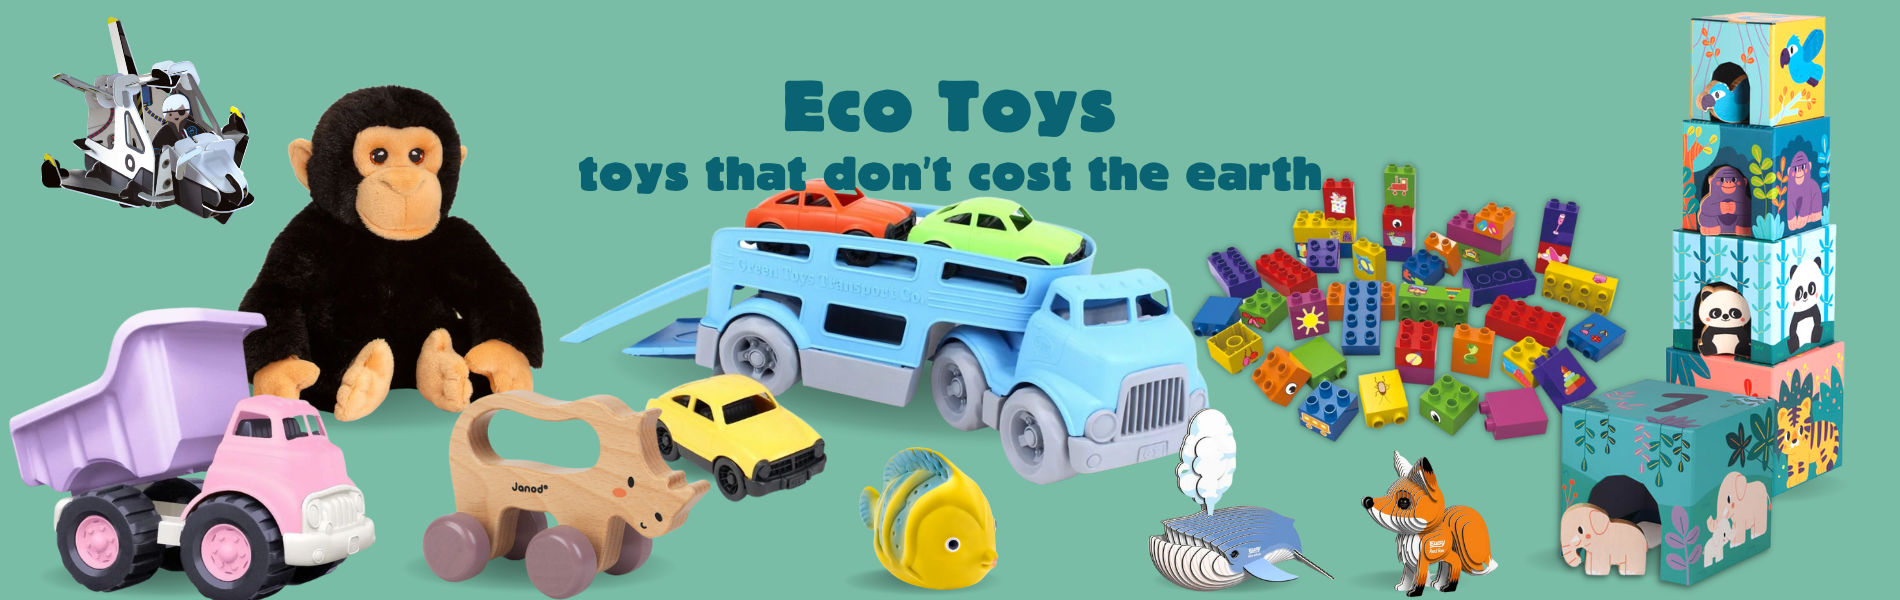 Lots of eco-friendly toys for kids including a pink dumper truck, a black cuddly chimp, a blue car transporter, colourful bricks and stacking blocks.